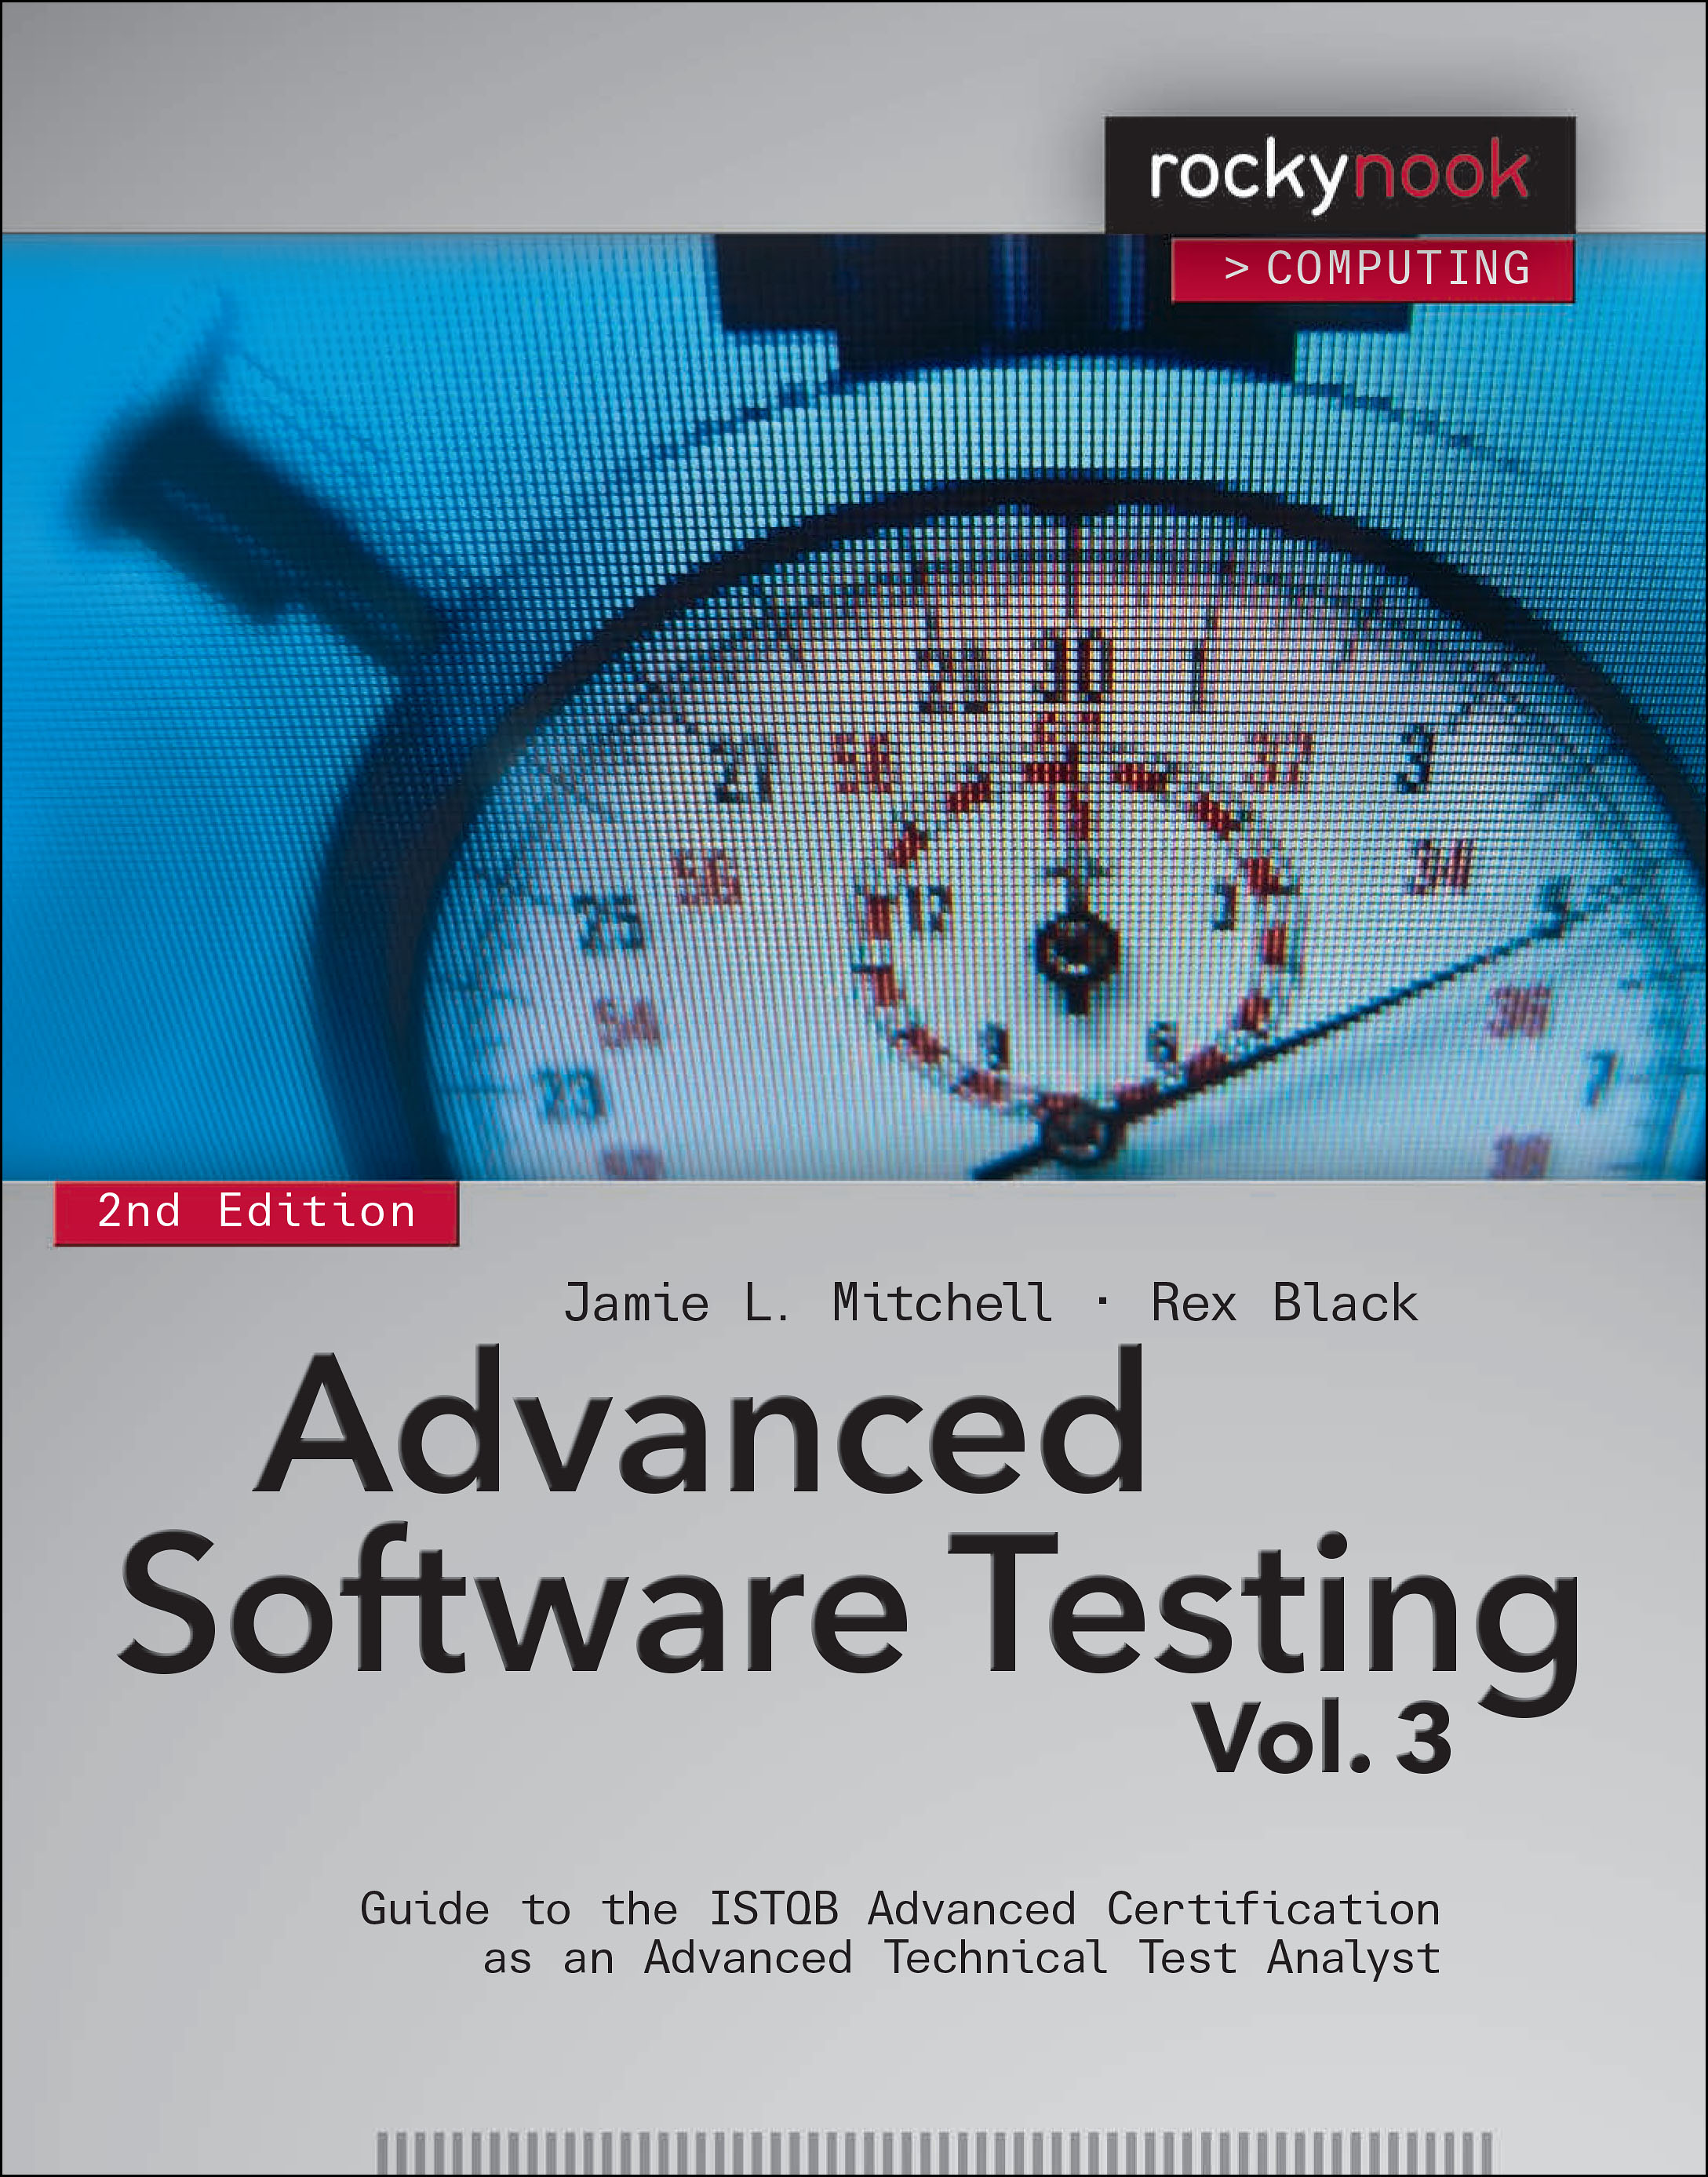 Advanced Software Testing - Vol. 3, 2nd Edition